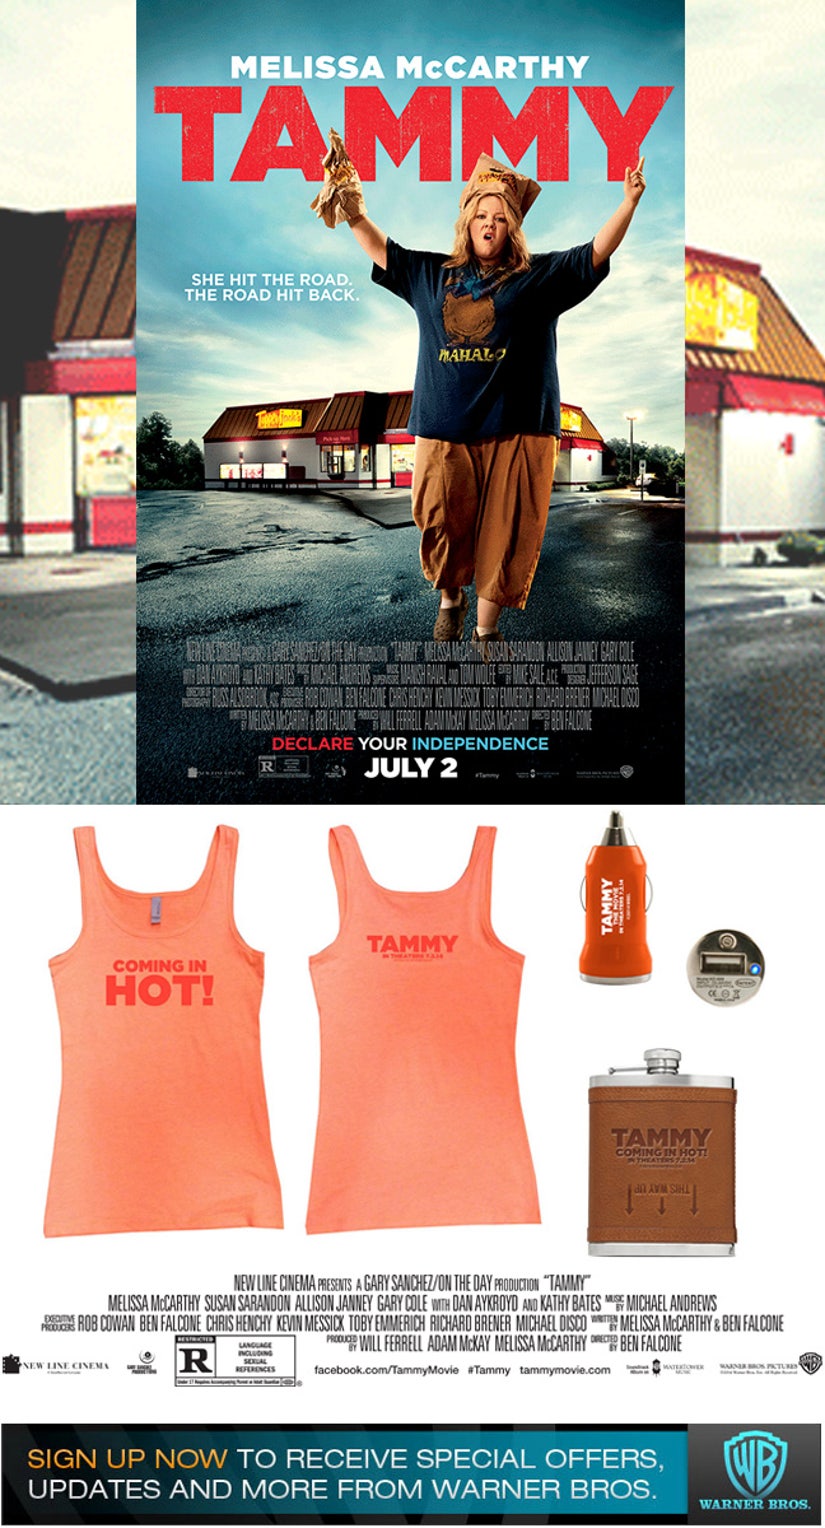 Win a "Tammy" Prize Pack And a 150 Gift Card!